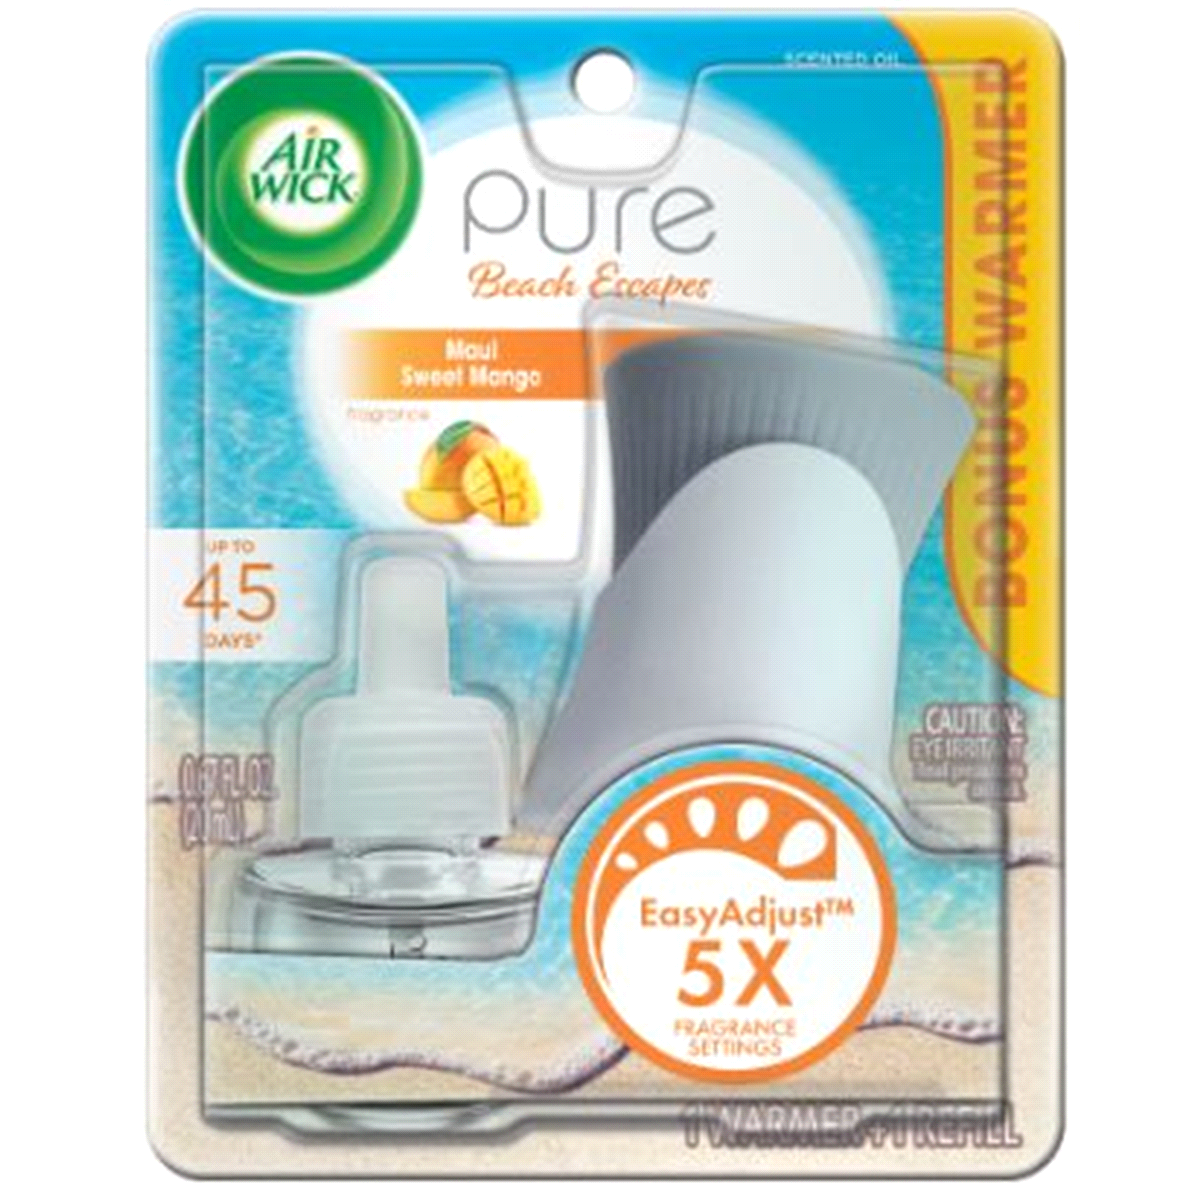 slide 1 of 1, Air Wick Pure Beach Escapes Scented Oil Starter Kit - Maui Sweet Mango, 1 ct